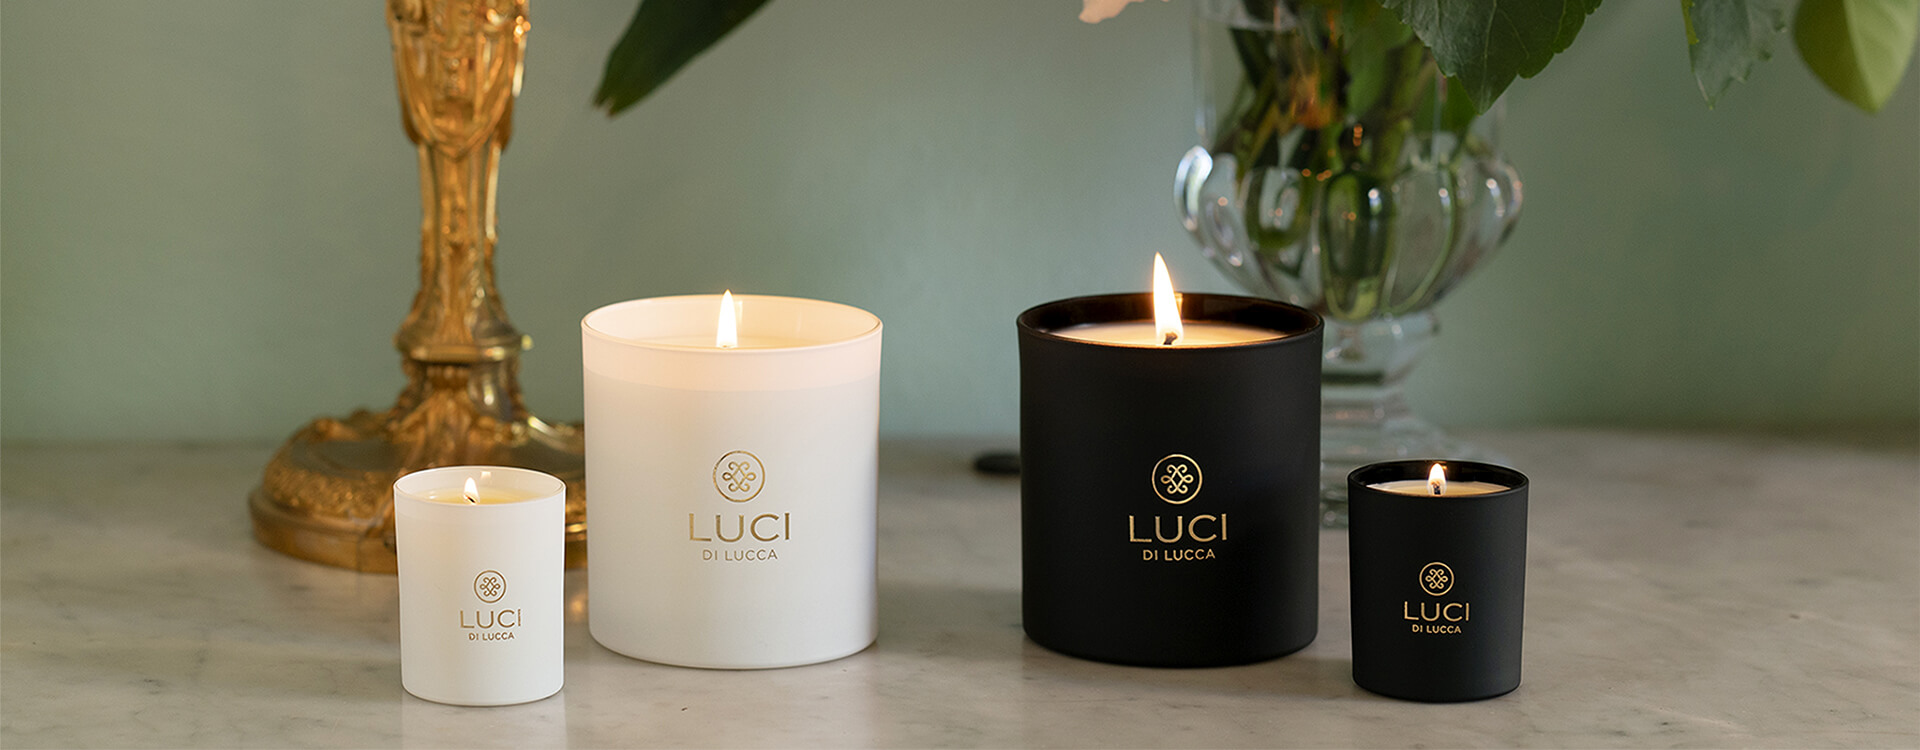 Luxury Scented Candles hand-crafted with Italian Passion in Lucca